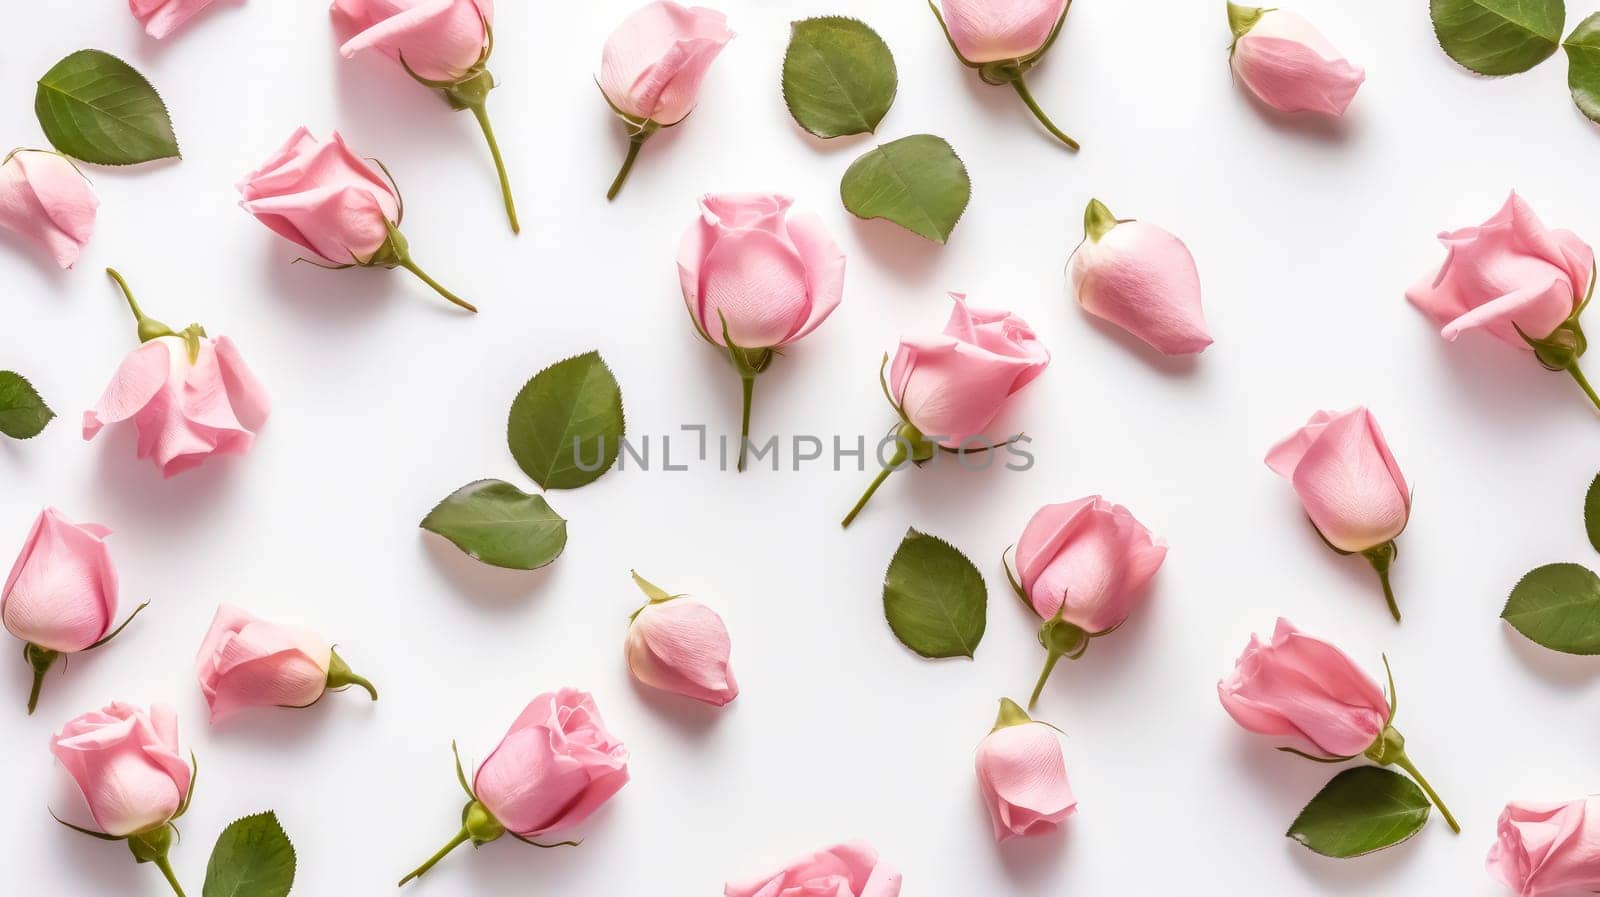 Elegant flat lay composition featuring a delicate framework made of roses on a clean white background. A timeless and romantic floral arrangement.